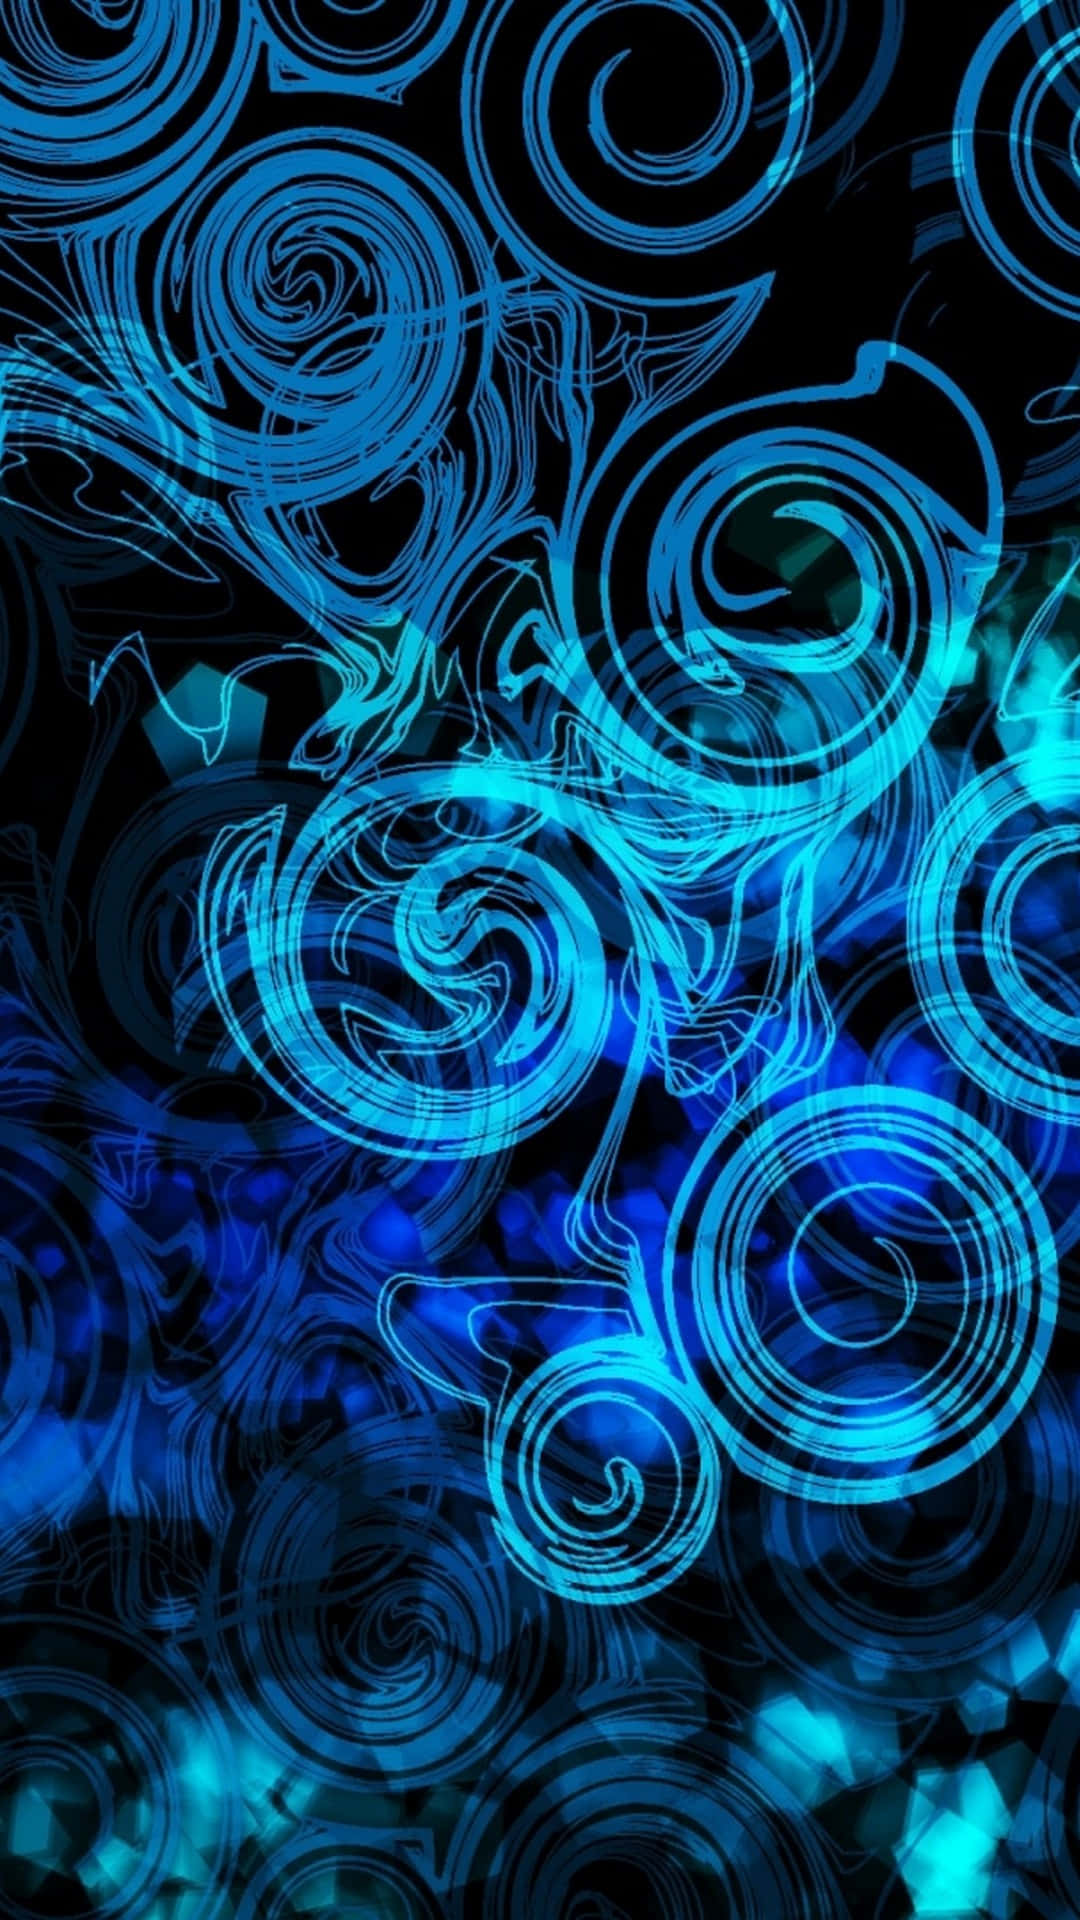 A Blue Abstract Background With Swirls Wallpaper